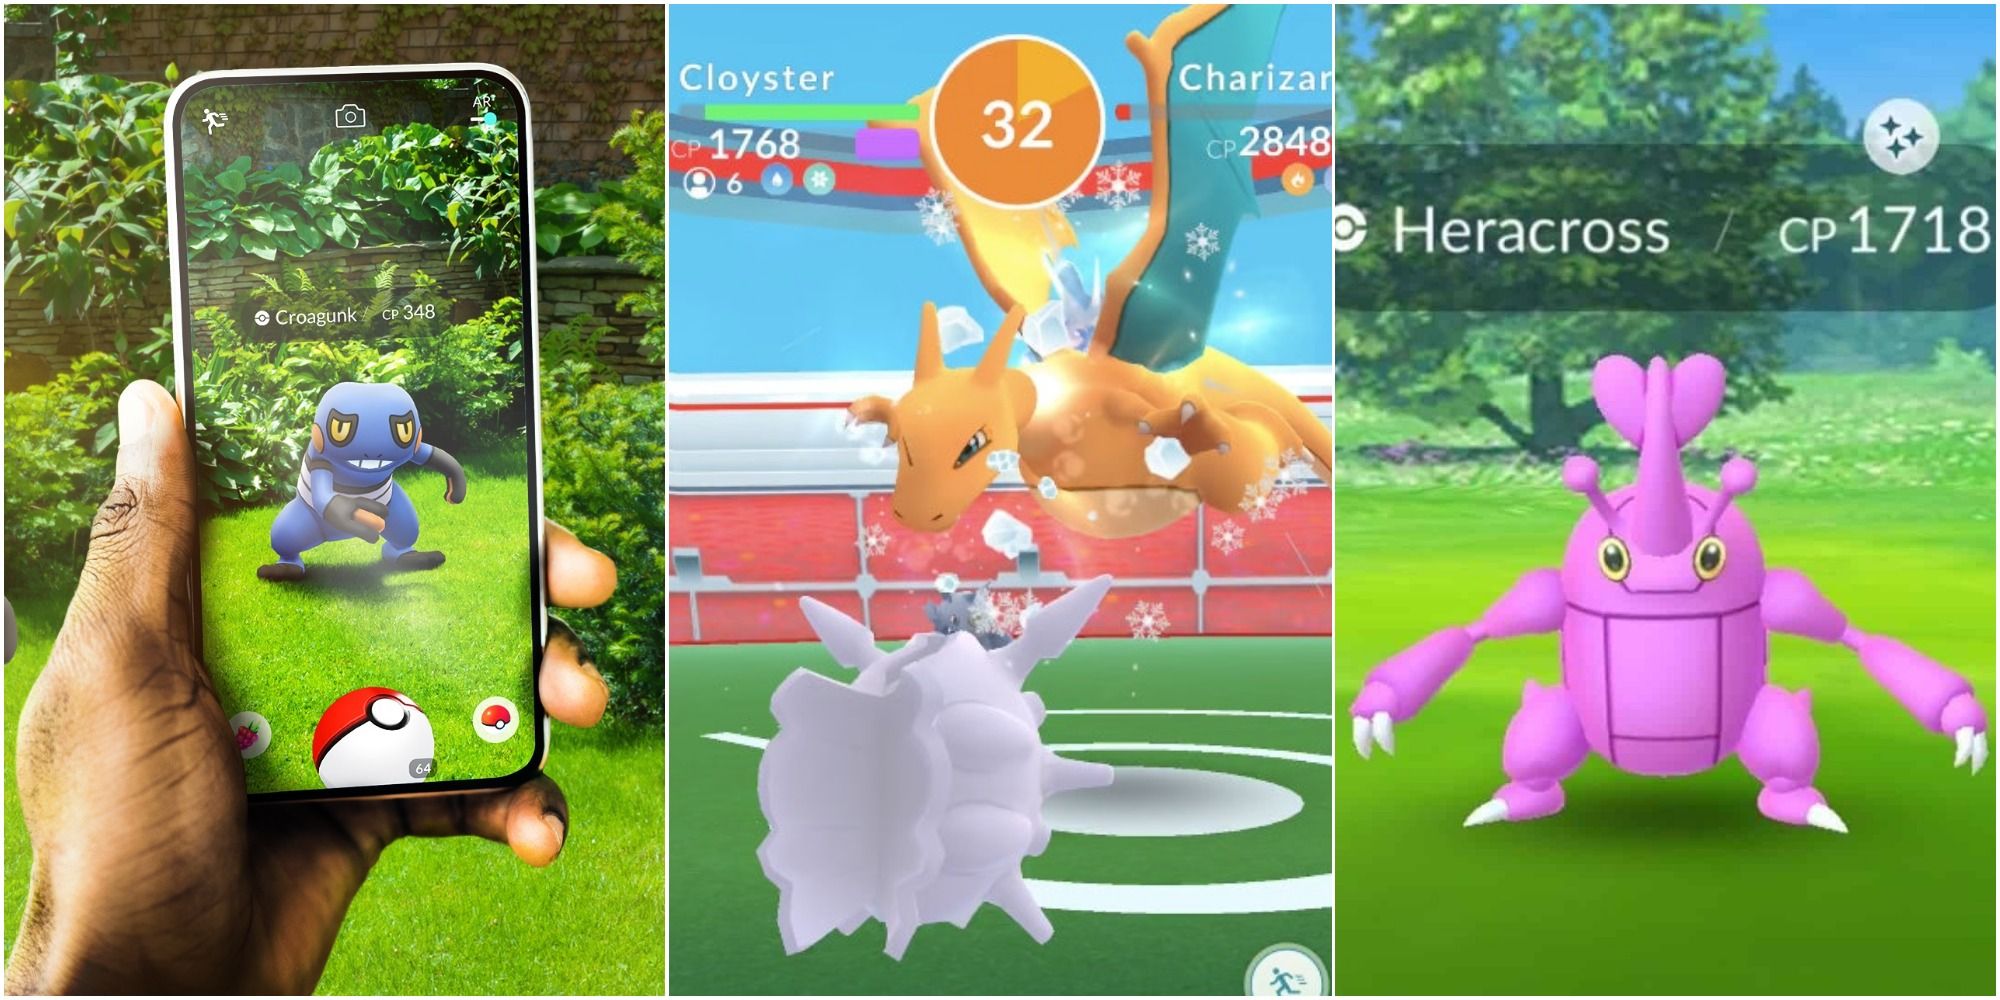 The Poke GO Hunter on X: Here's a look at Generation 9 Paldea and their  potential Max CP's in #PokemonGO! Could be a while until these Pokémon  release but there's some amazing